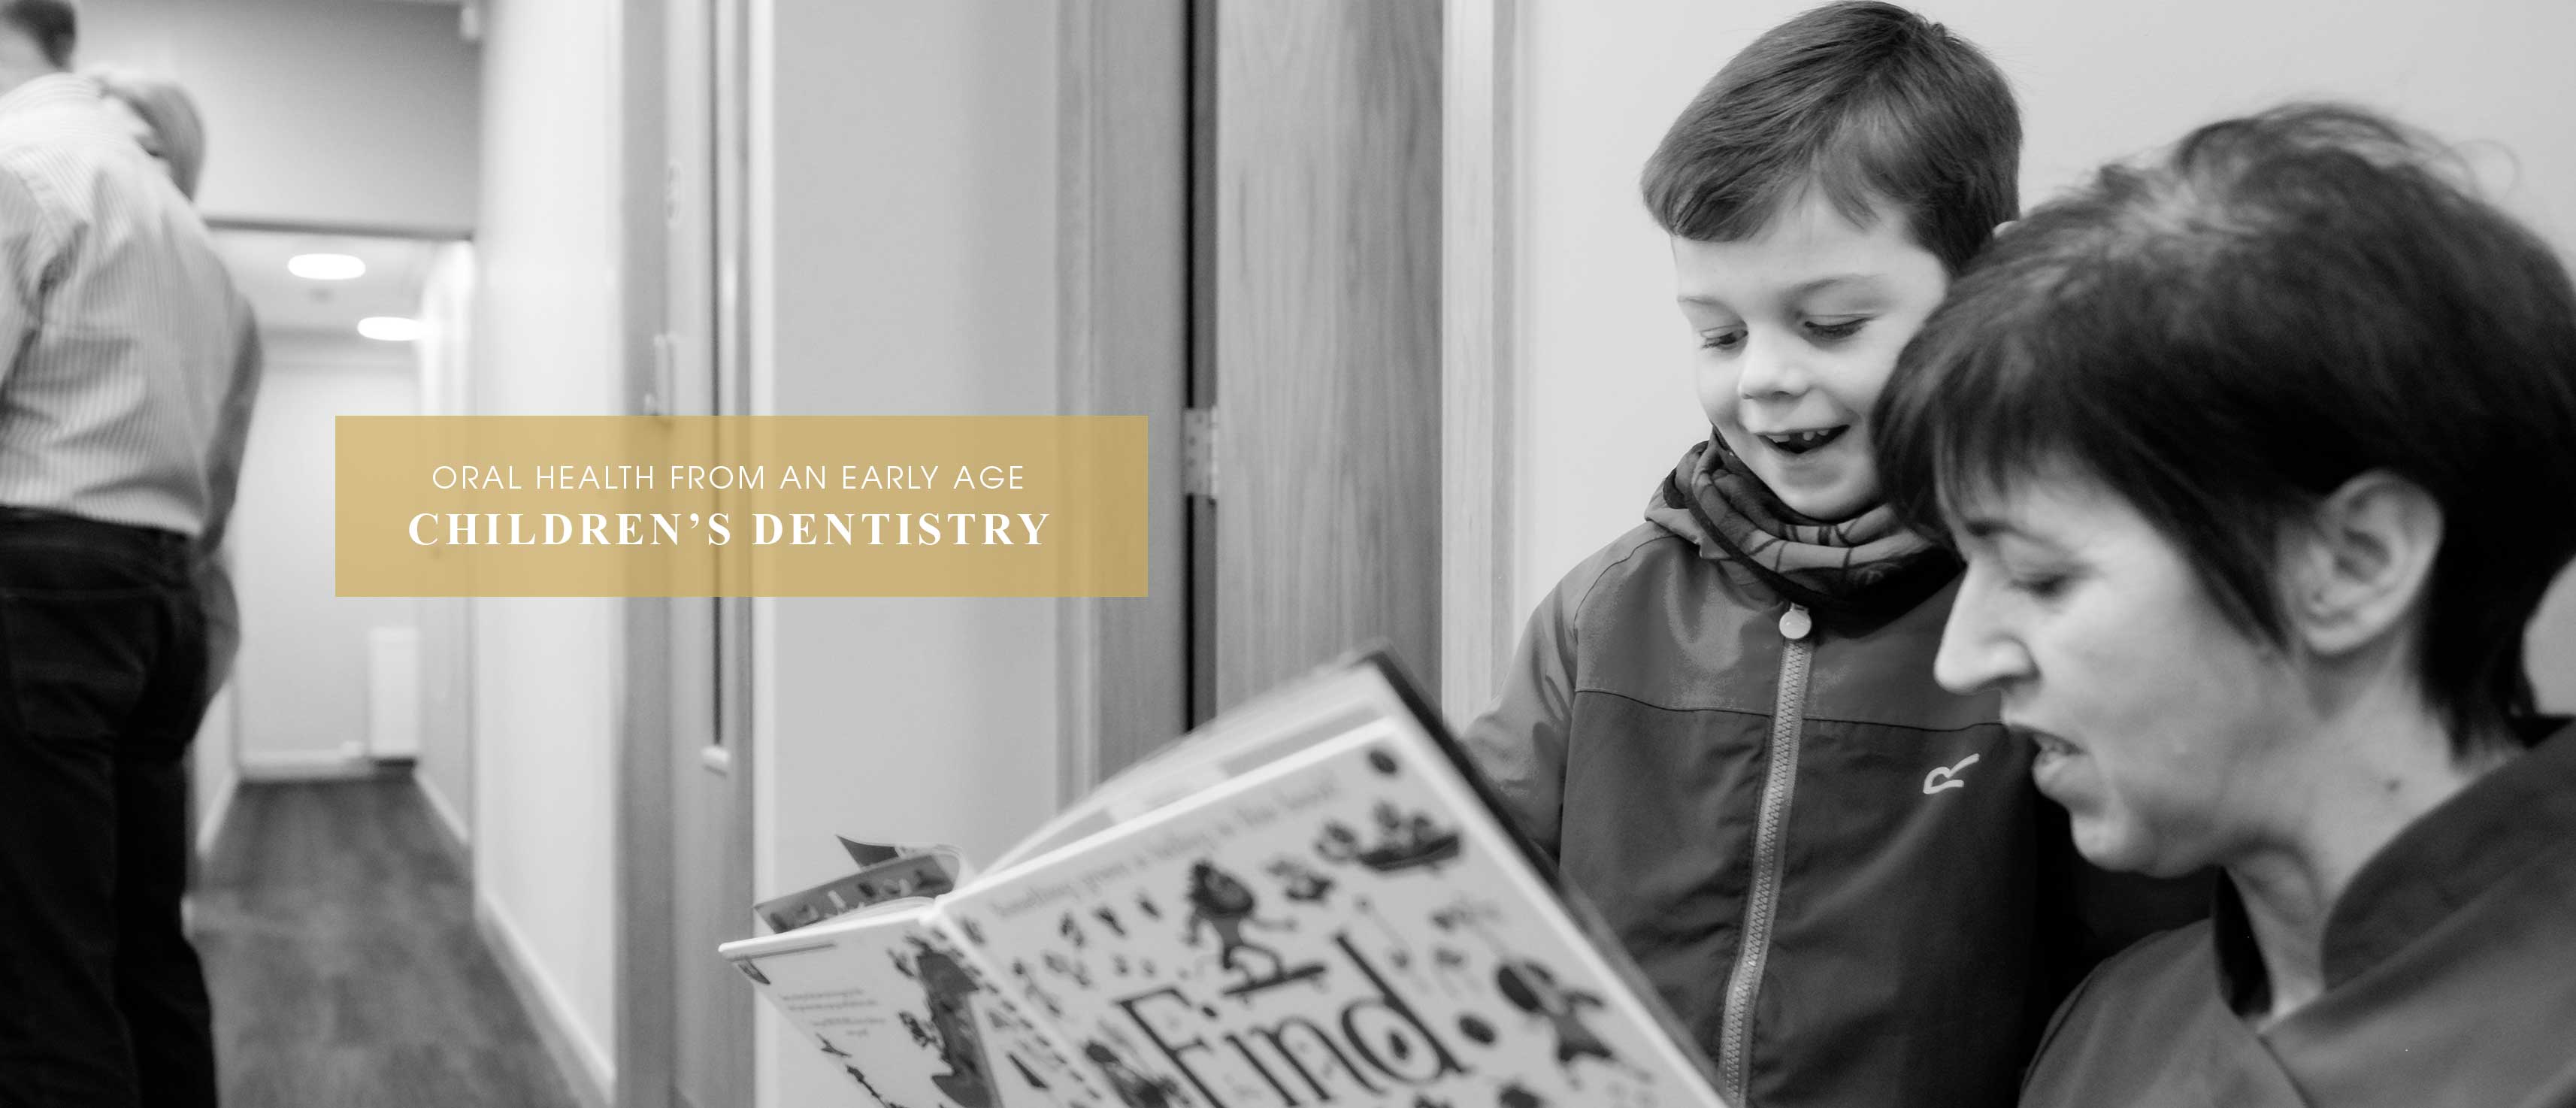 Oral Health from an Early Age. Children's Dentistry.